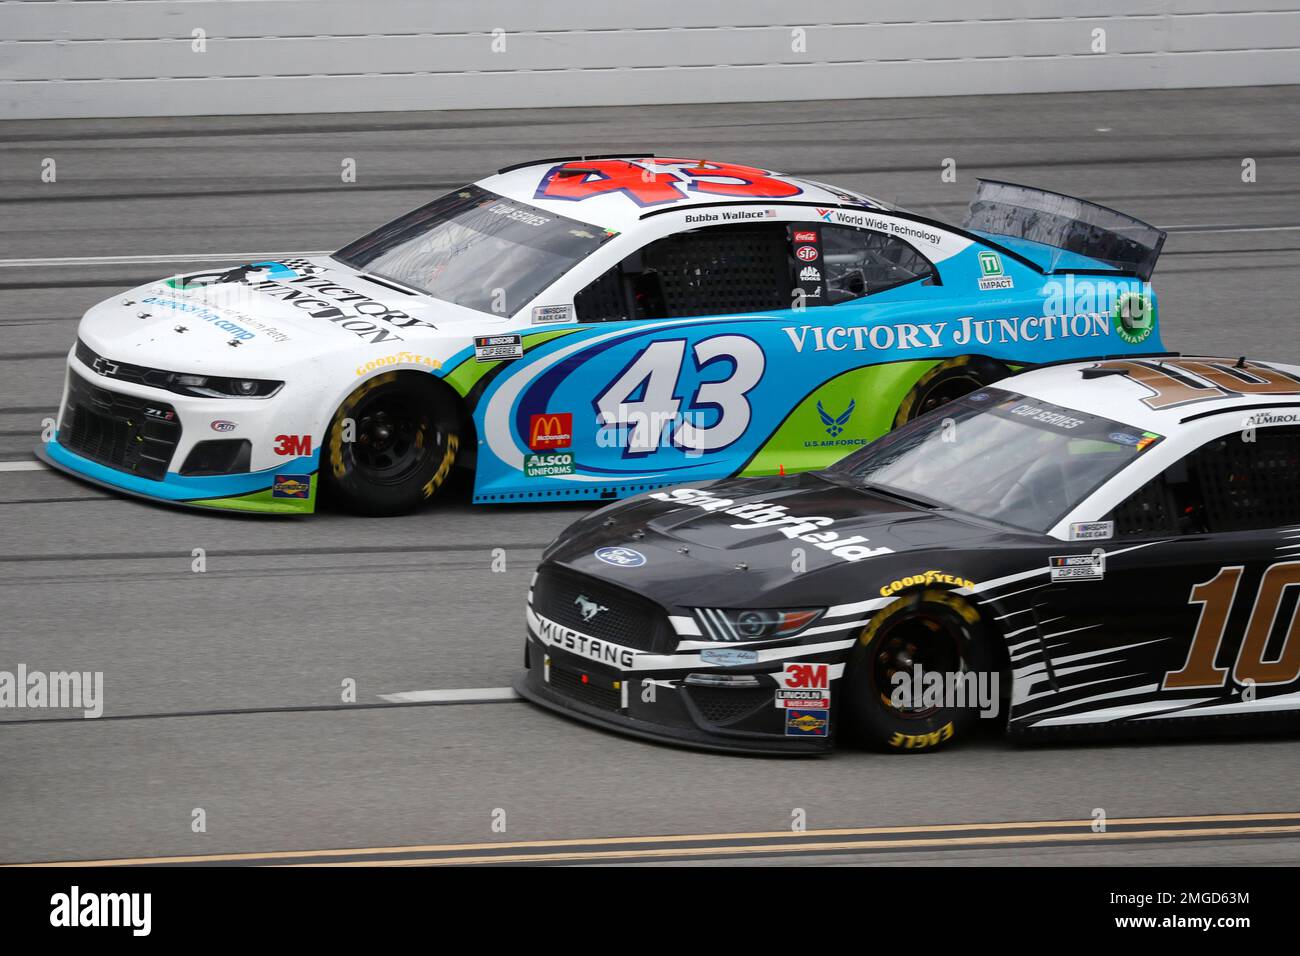 Bubba Wallace (43) and Aric Almirola (10) race side-by-side during a NASCAR Cup Series auto race at Talladega Superspeedway in Talladega Ala., Monday, June 22, 2020